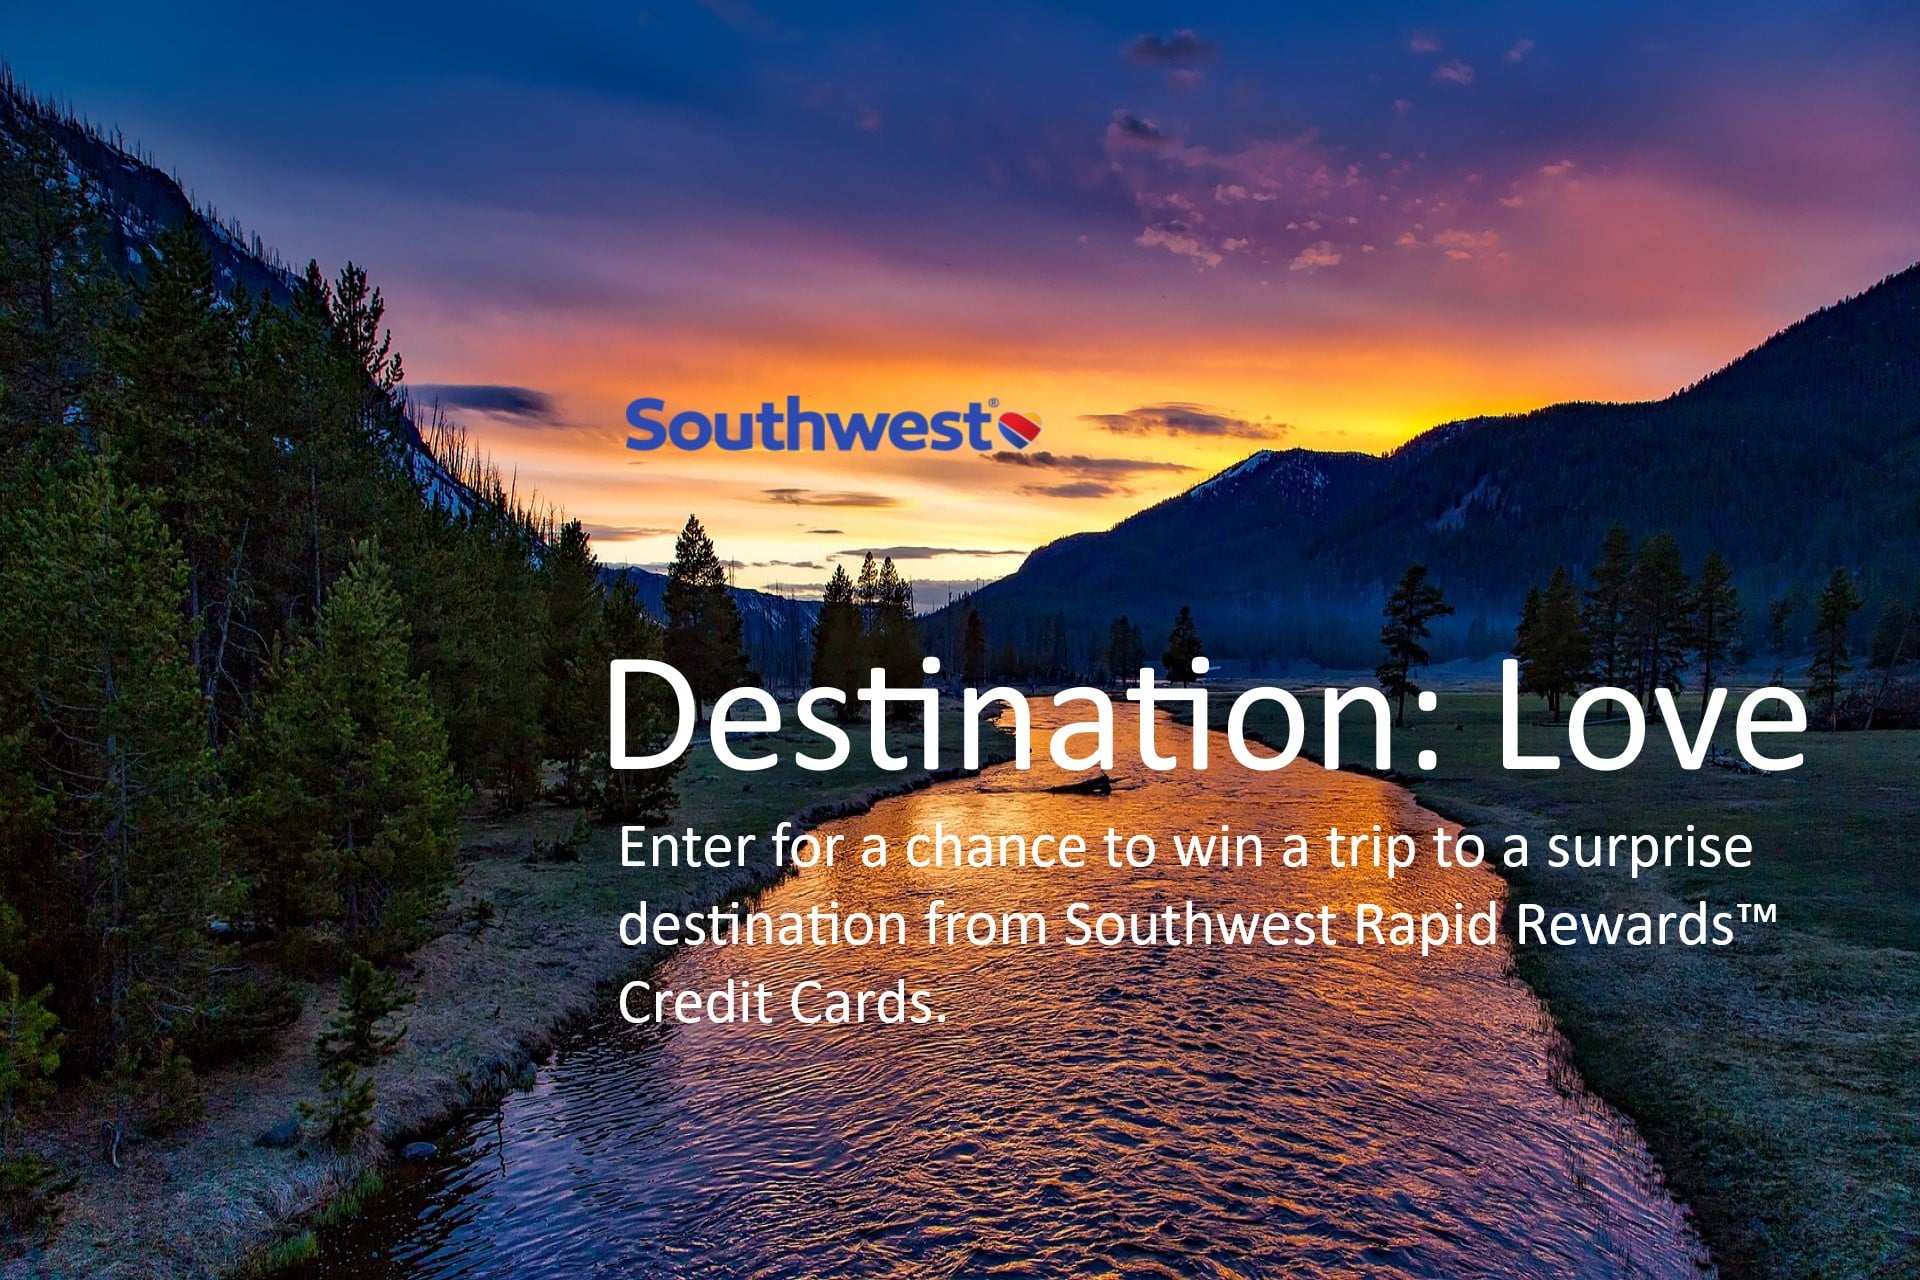 Destination: Love sweepstakes from Chase and Southwest Airlines Rapid Rewards BestCards.com